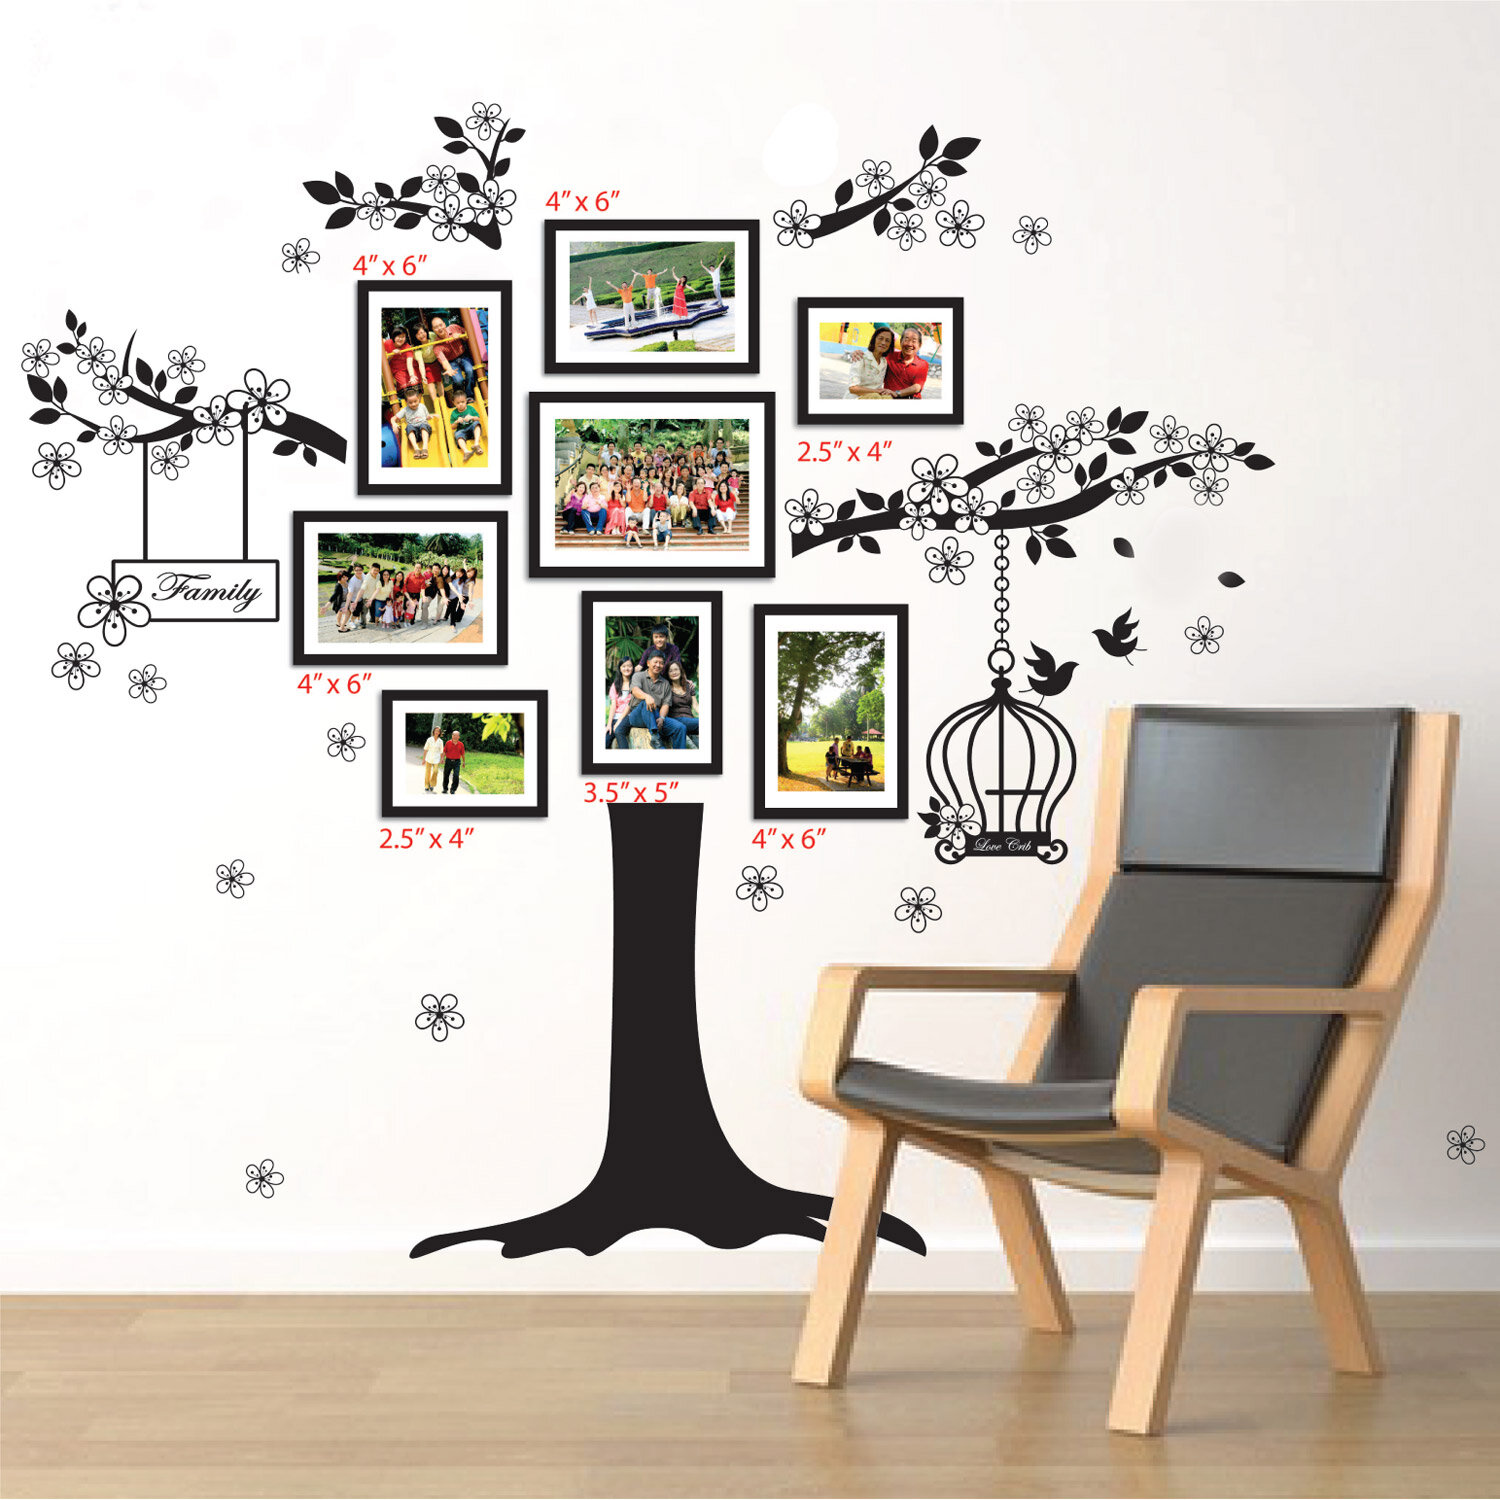 Set of 2 Brewster Picture Frames Wall Stickers 